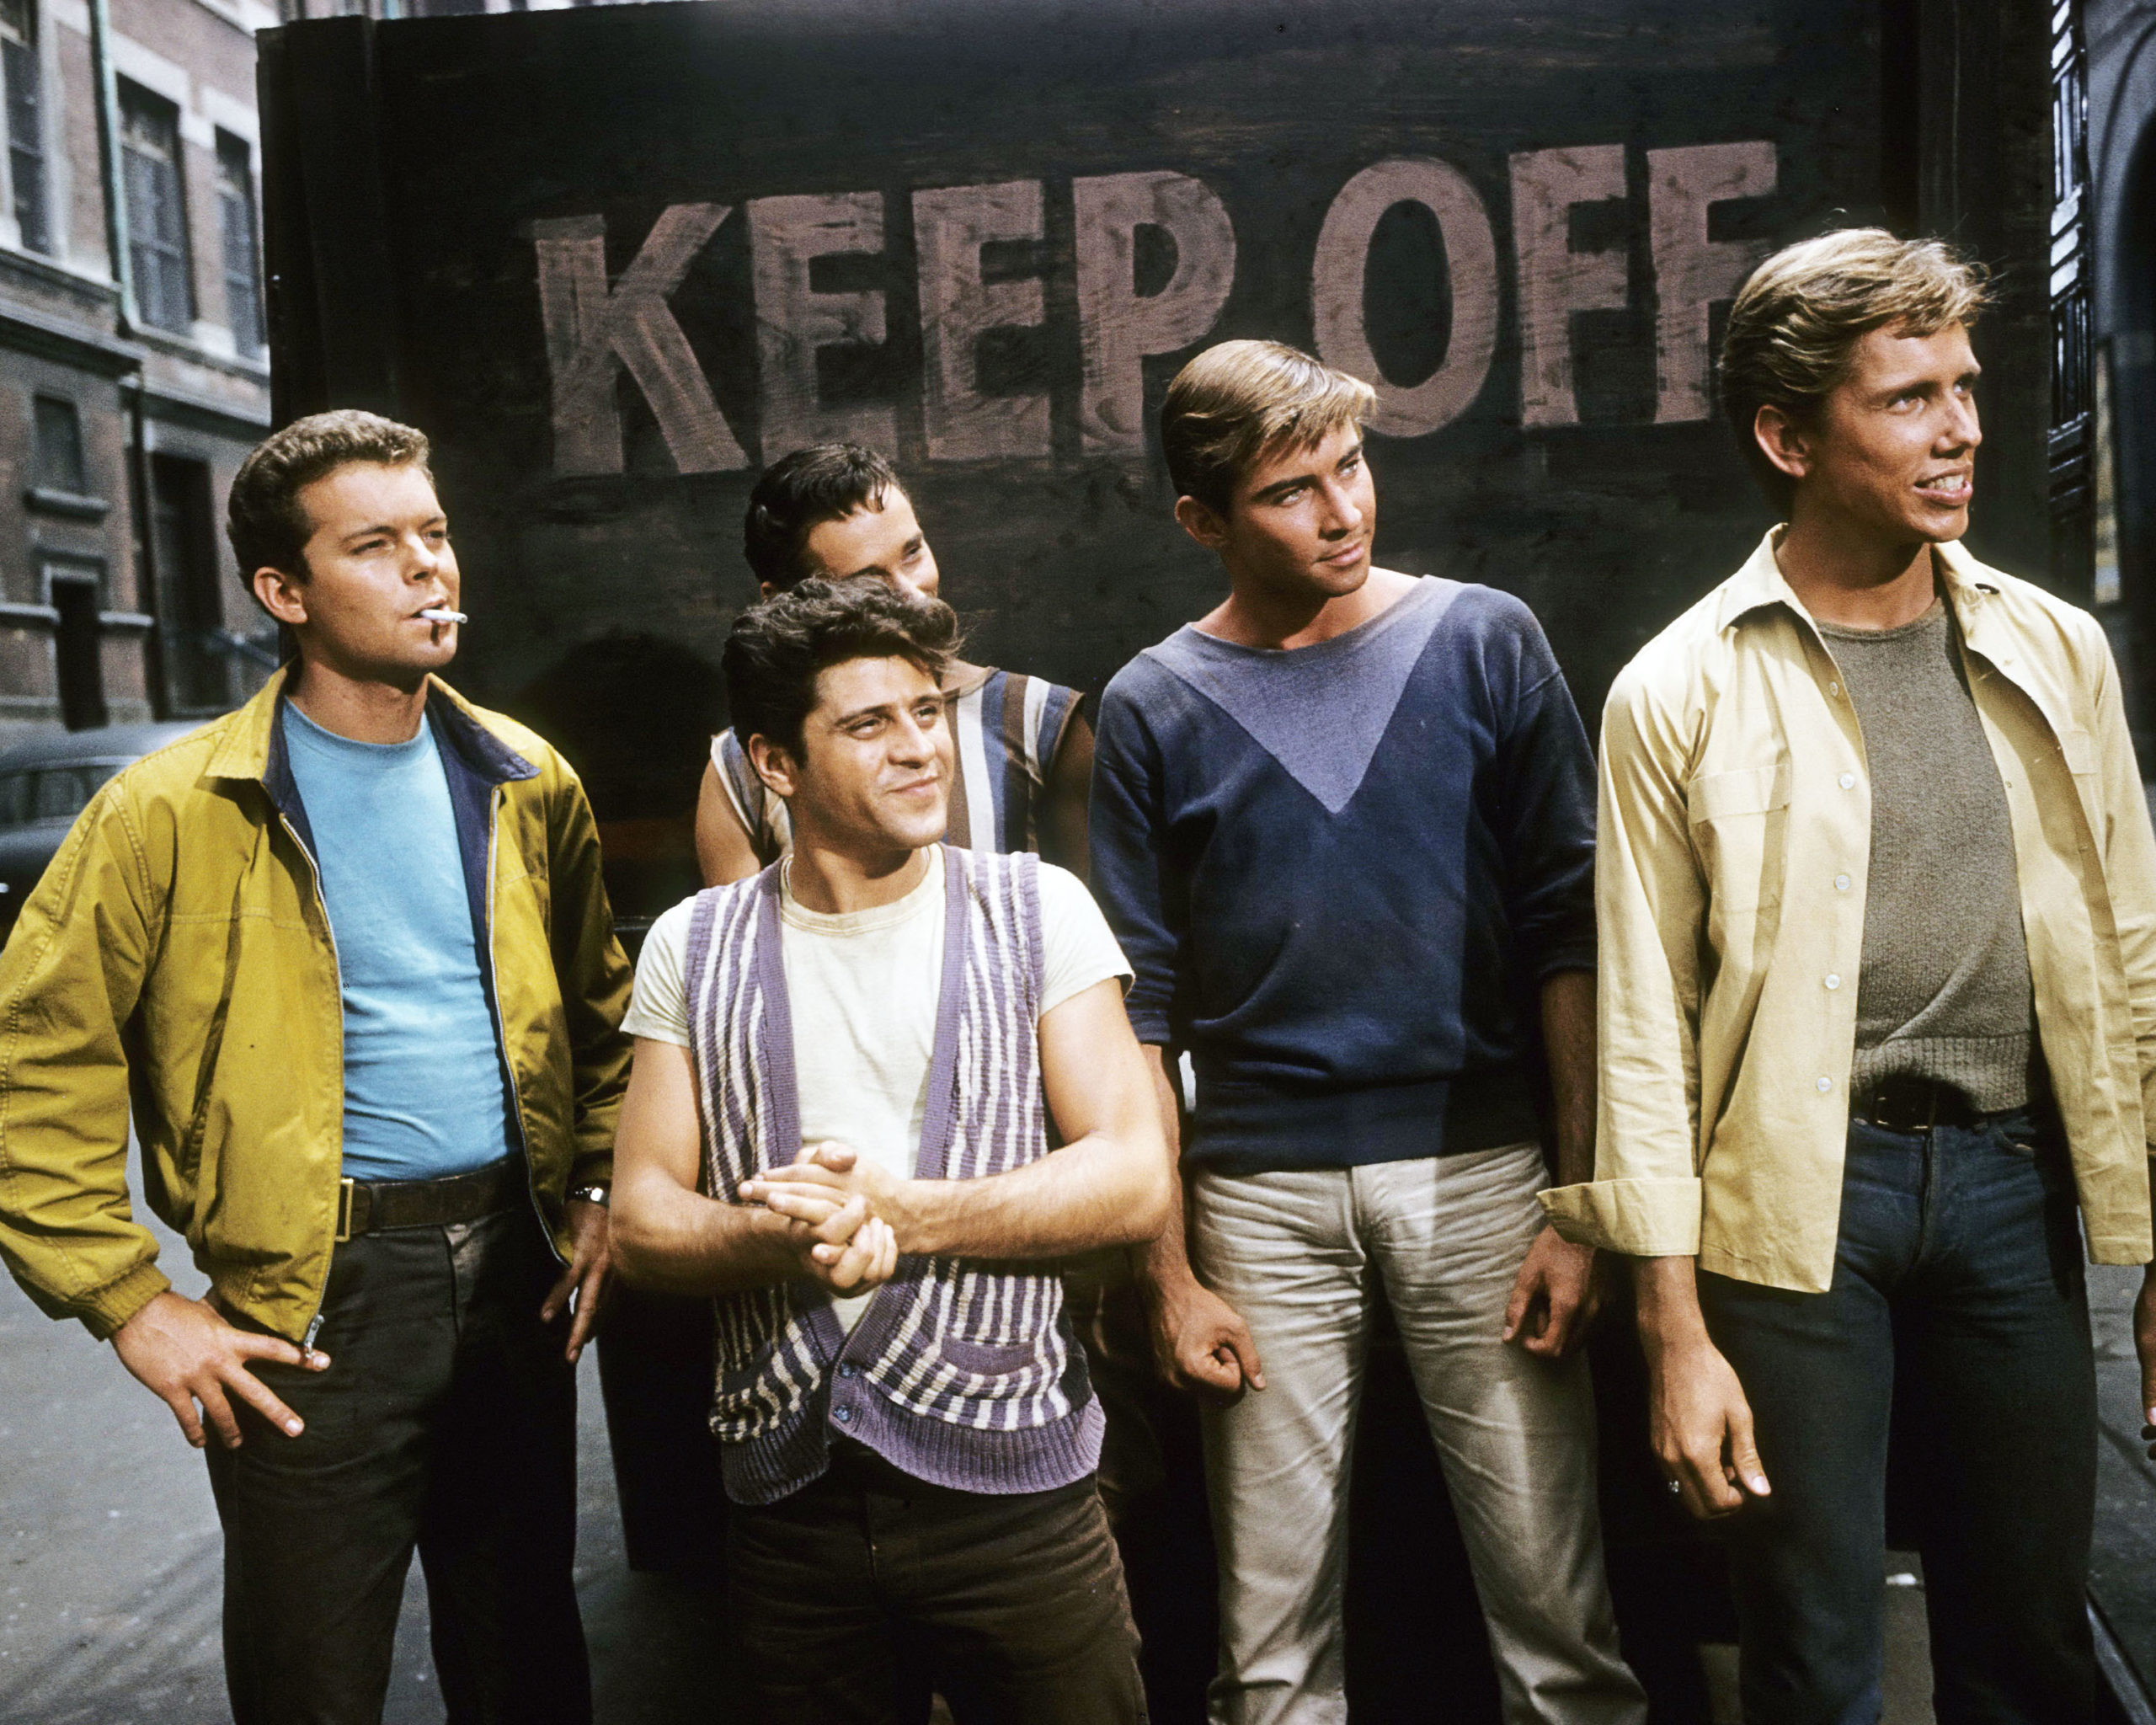 From left to right, actors Russ Tamblyn, Tony Mordente, Tucker Smith and Scooter Teague in a publicity still issued for the film, 'West Side Story', USA, 1961. The musical, directed by Robert Wise (1914-2005) and Jerome Robbins (1918-1998), starred Beymer as 'Tony Wycek', Tamblyn as 'Riff Lorton', and Chakiris as 'Bernardo Nunez'. (Photo by Silver Screen Collection/Getty Images)